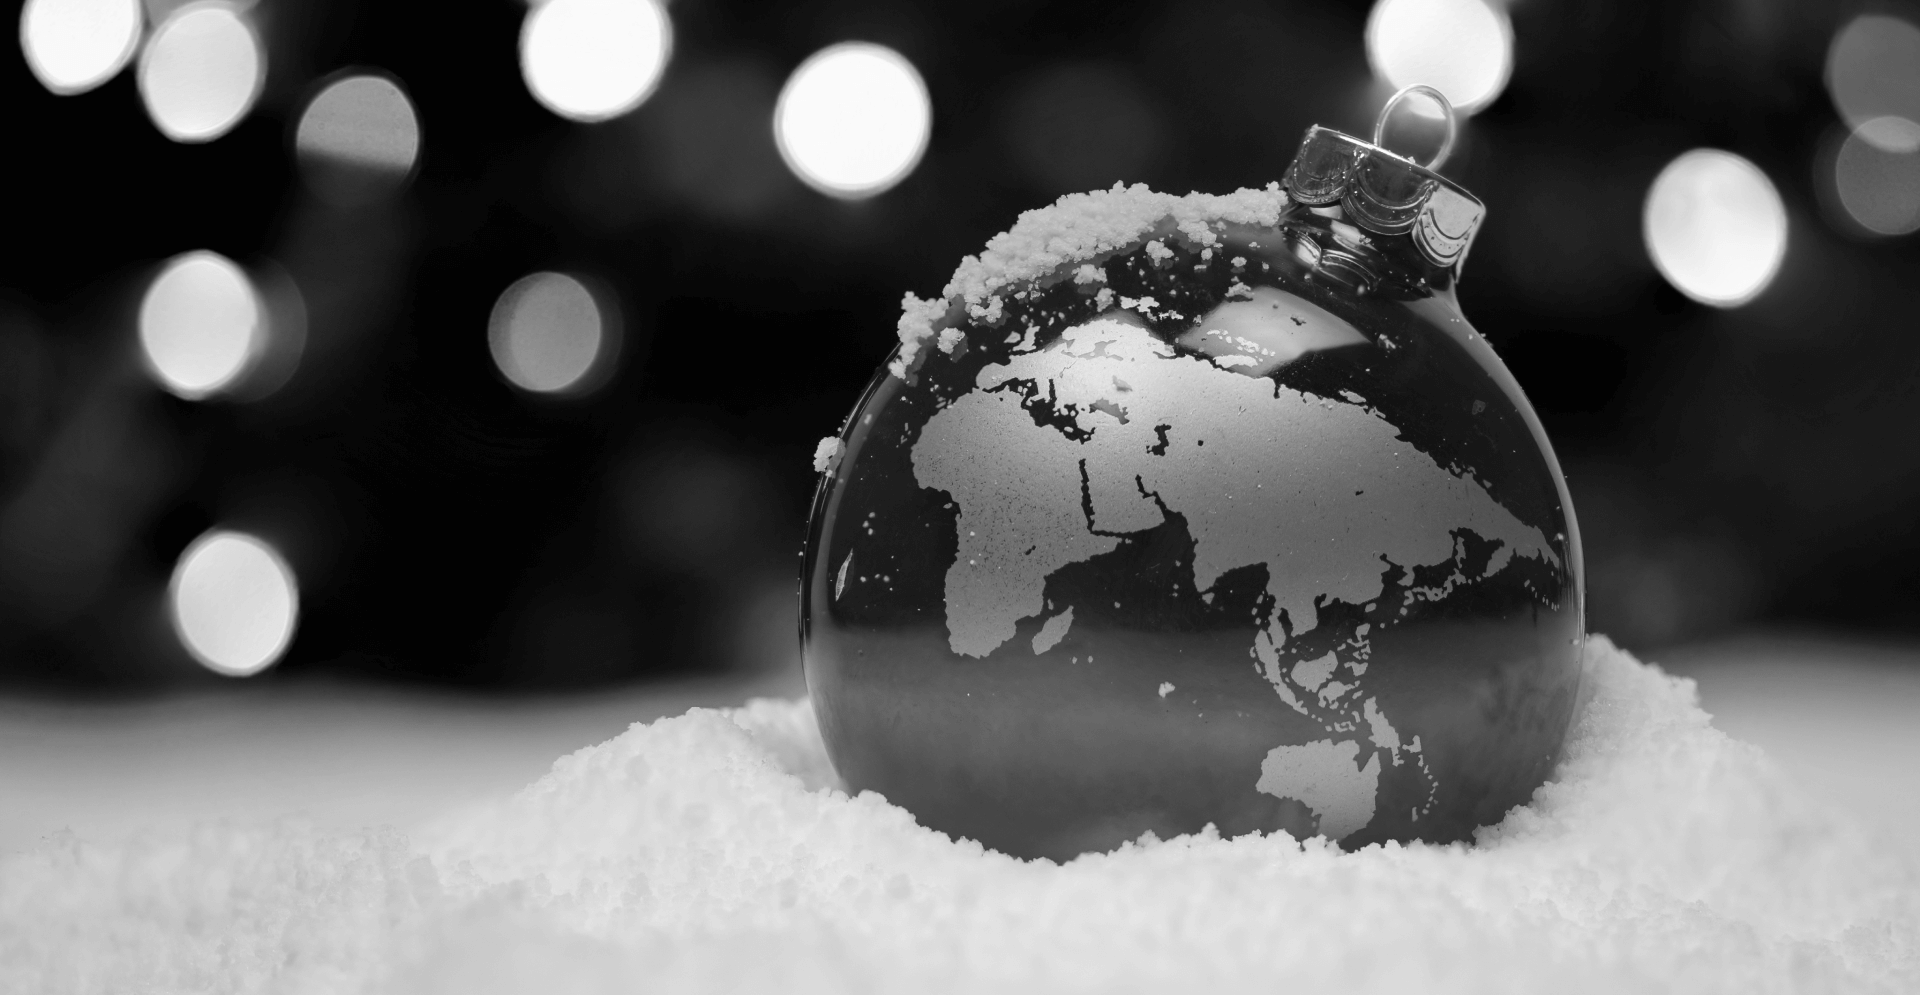 This image of a bauble in the snow with a stencil of a globe on it highlights this article's main topic: global issues at Christmas, specifically the international impact of counterfeits.